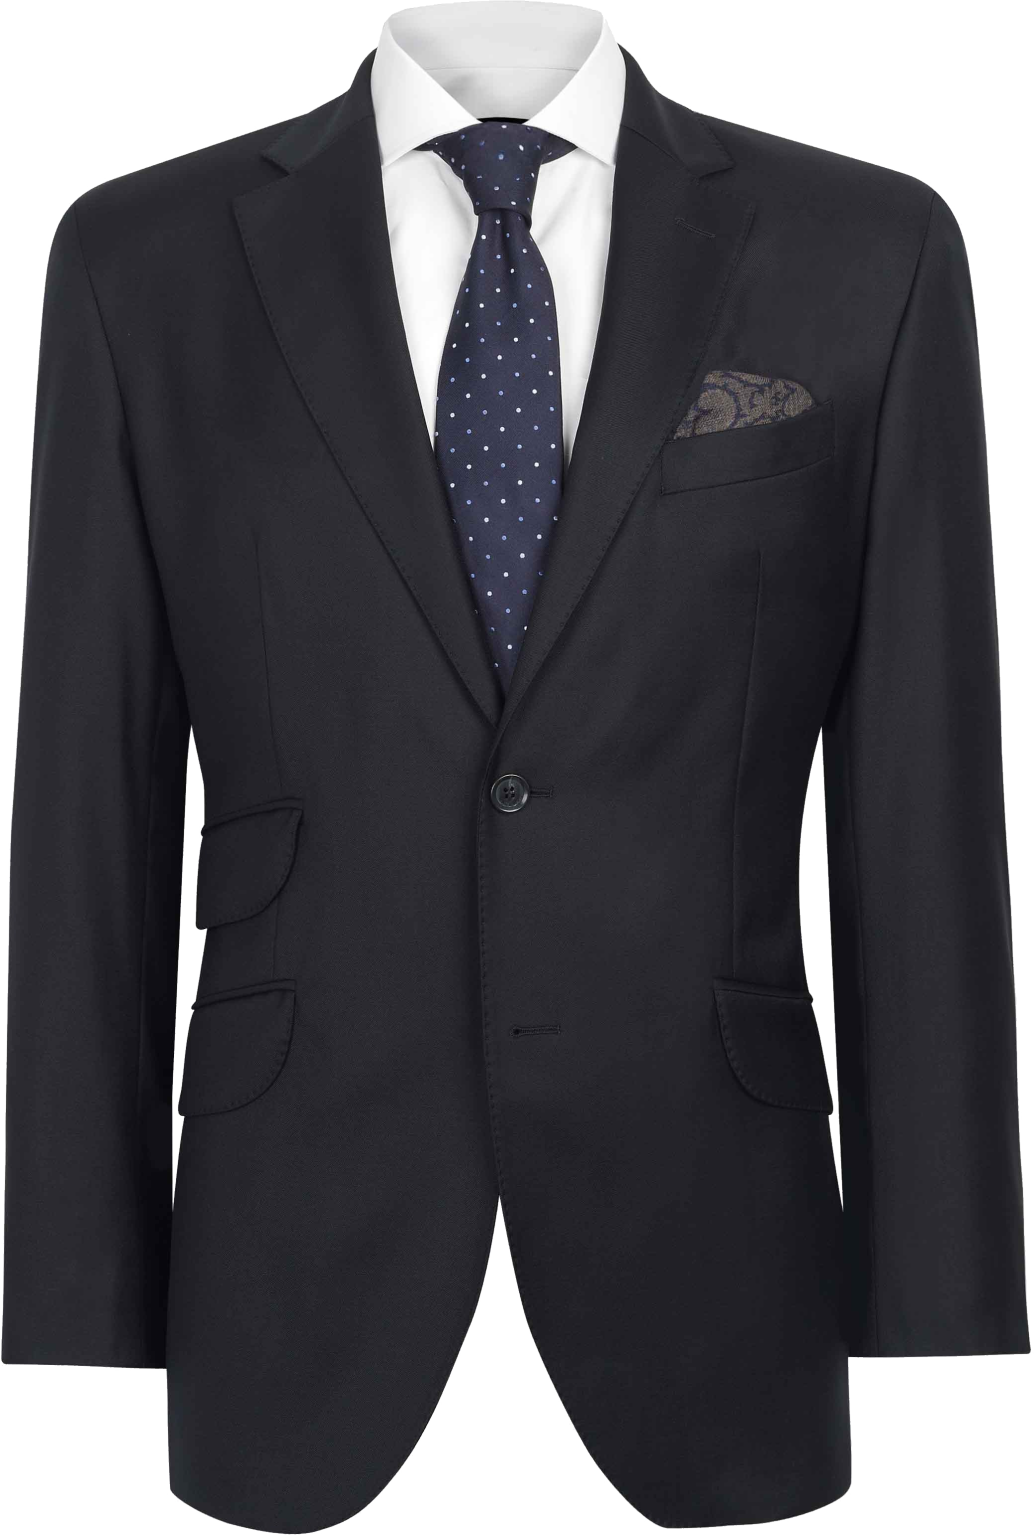 Business suit png - Download Free Png Images